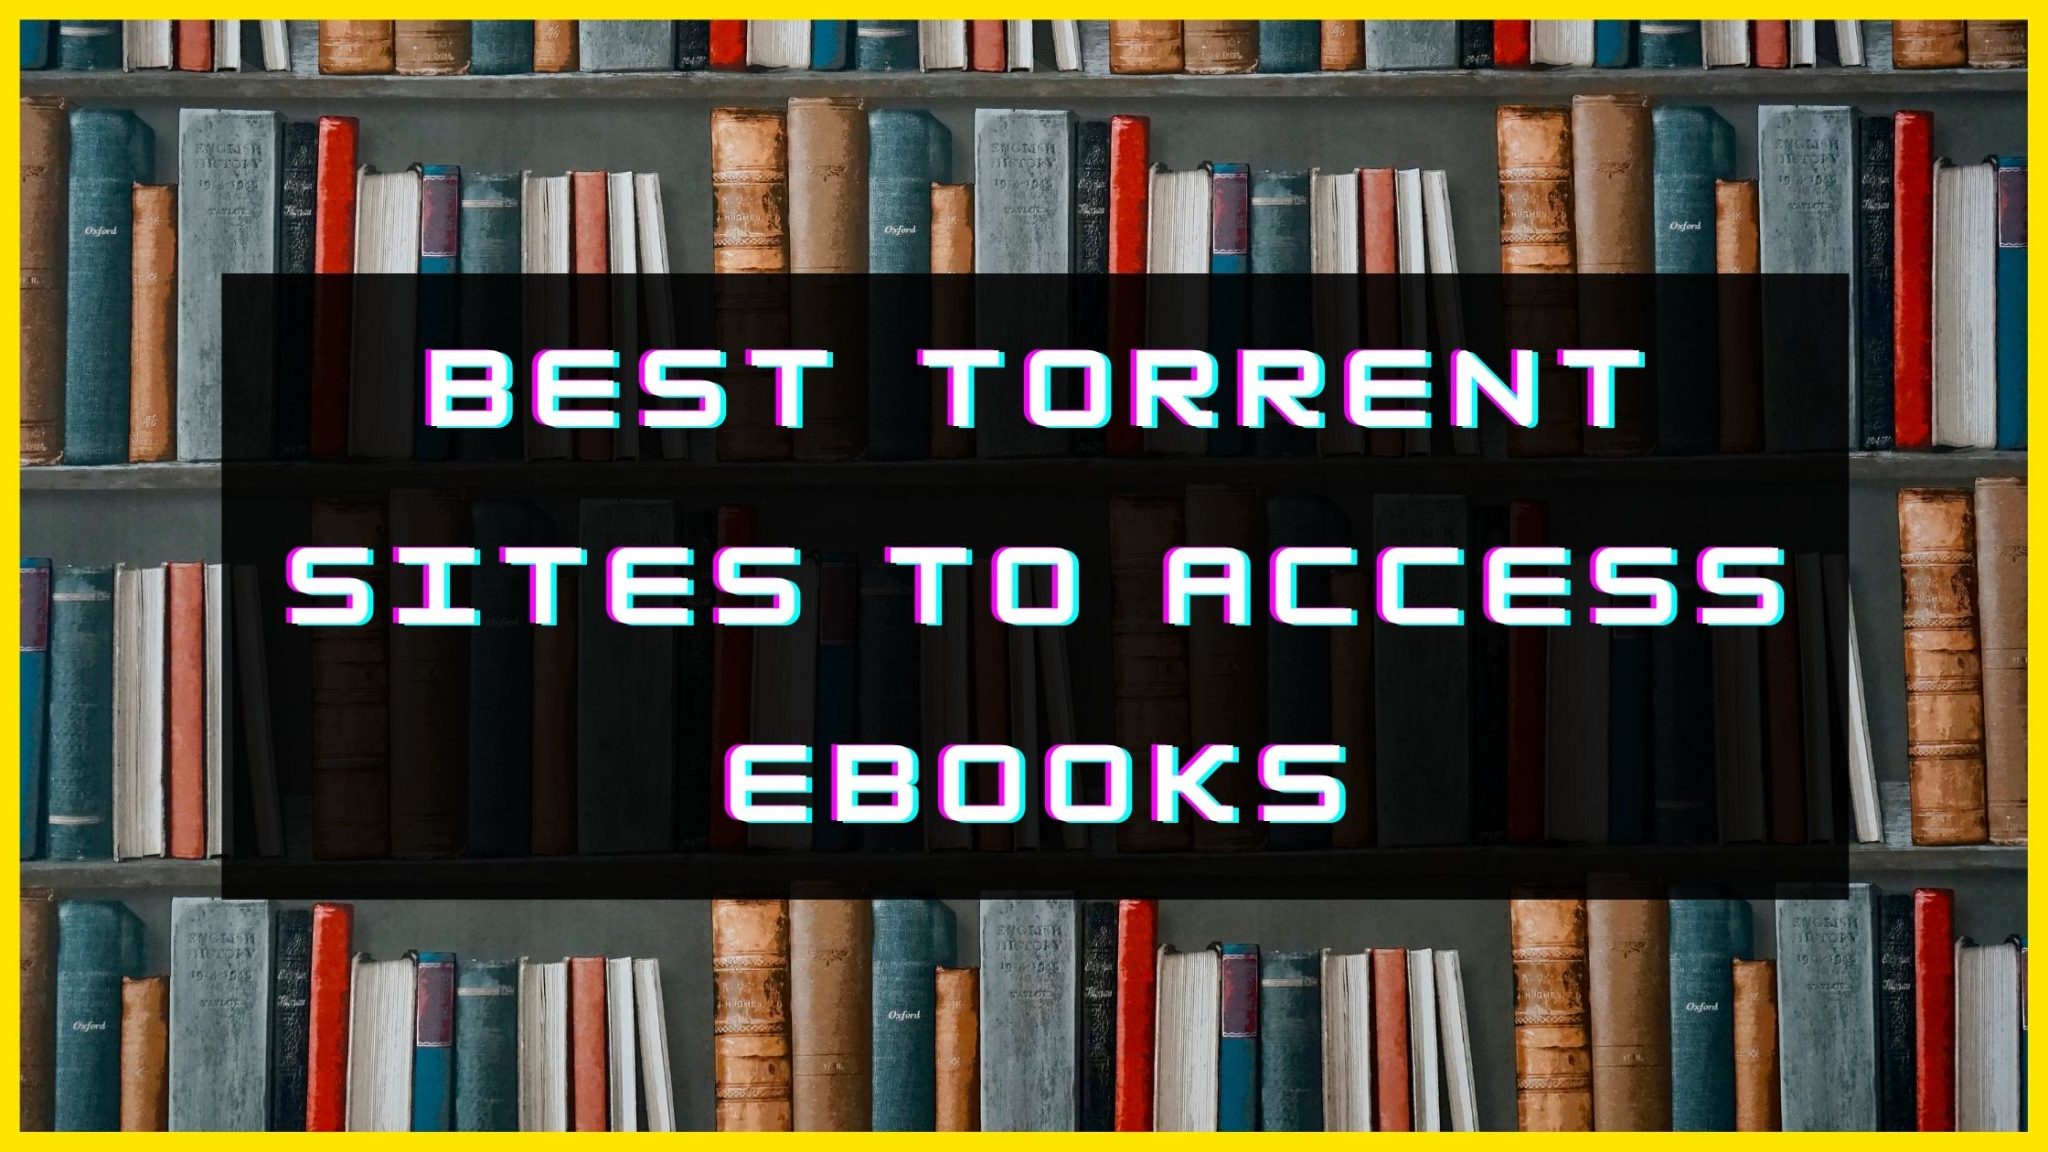 torrent sites to access ebooks